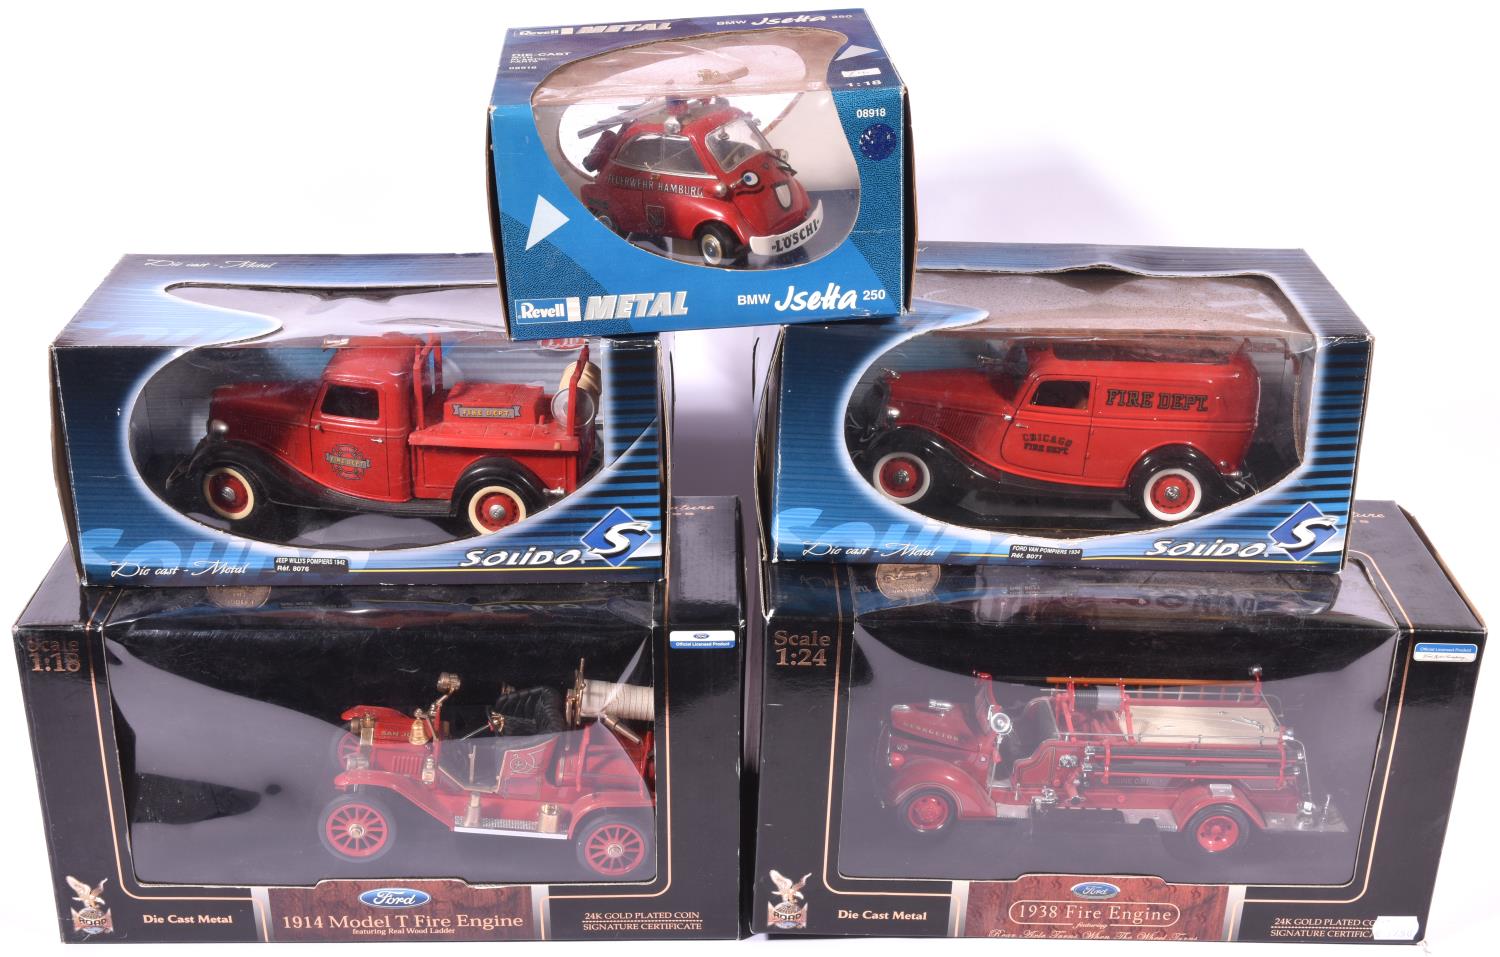 5 1:18 / 1:24 scale. 2x Solido- 1934 Ford Van, Pompiers and a 1942 Ford Pompier. Plus a Revell BMW